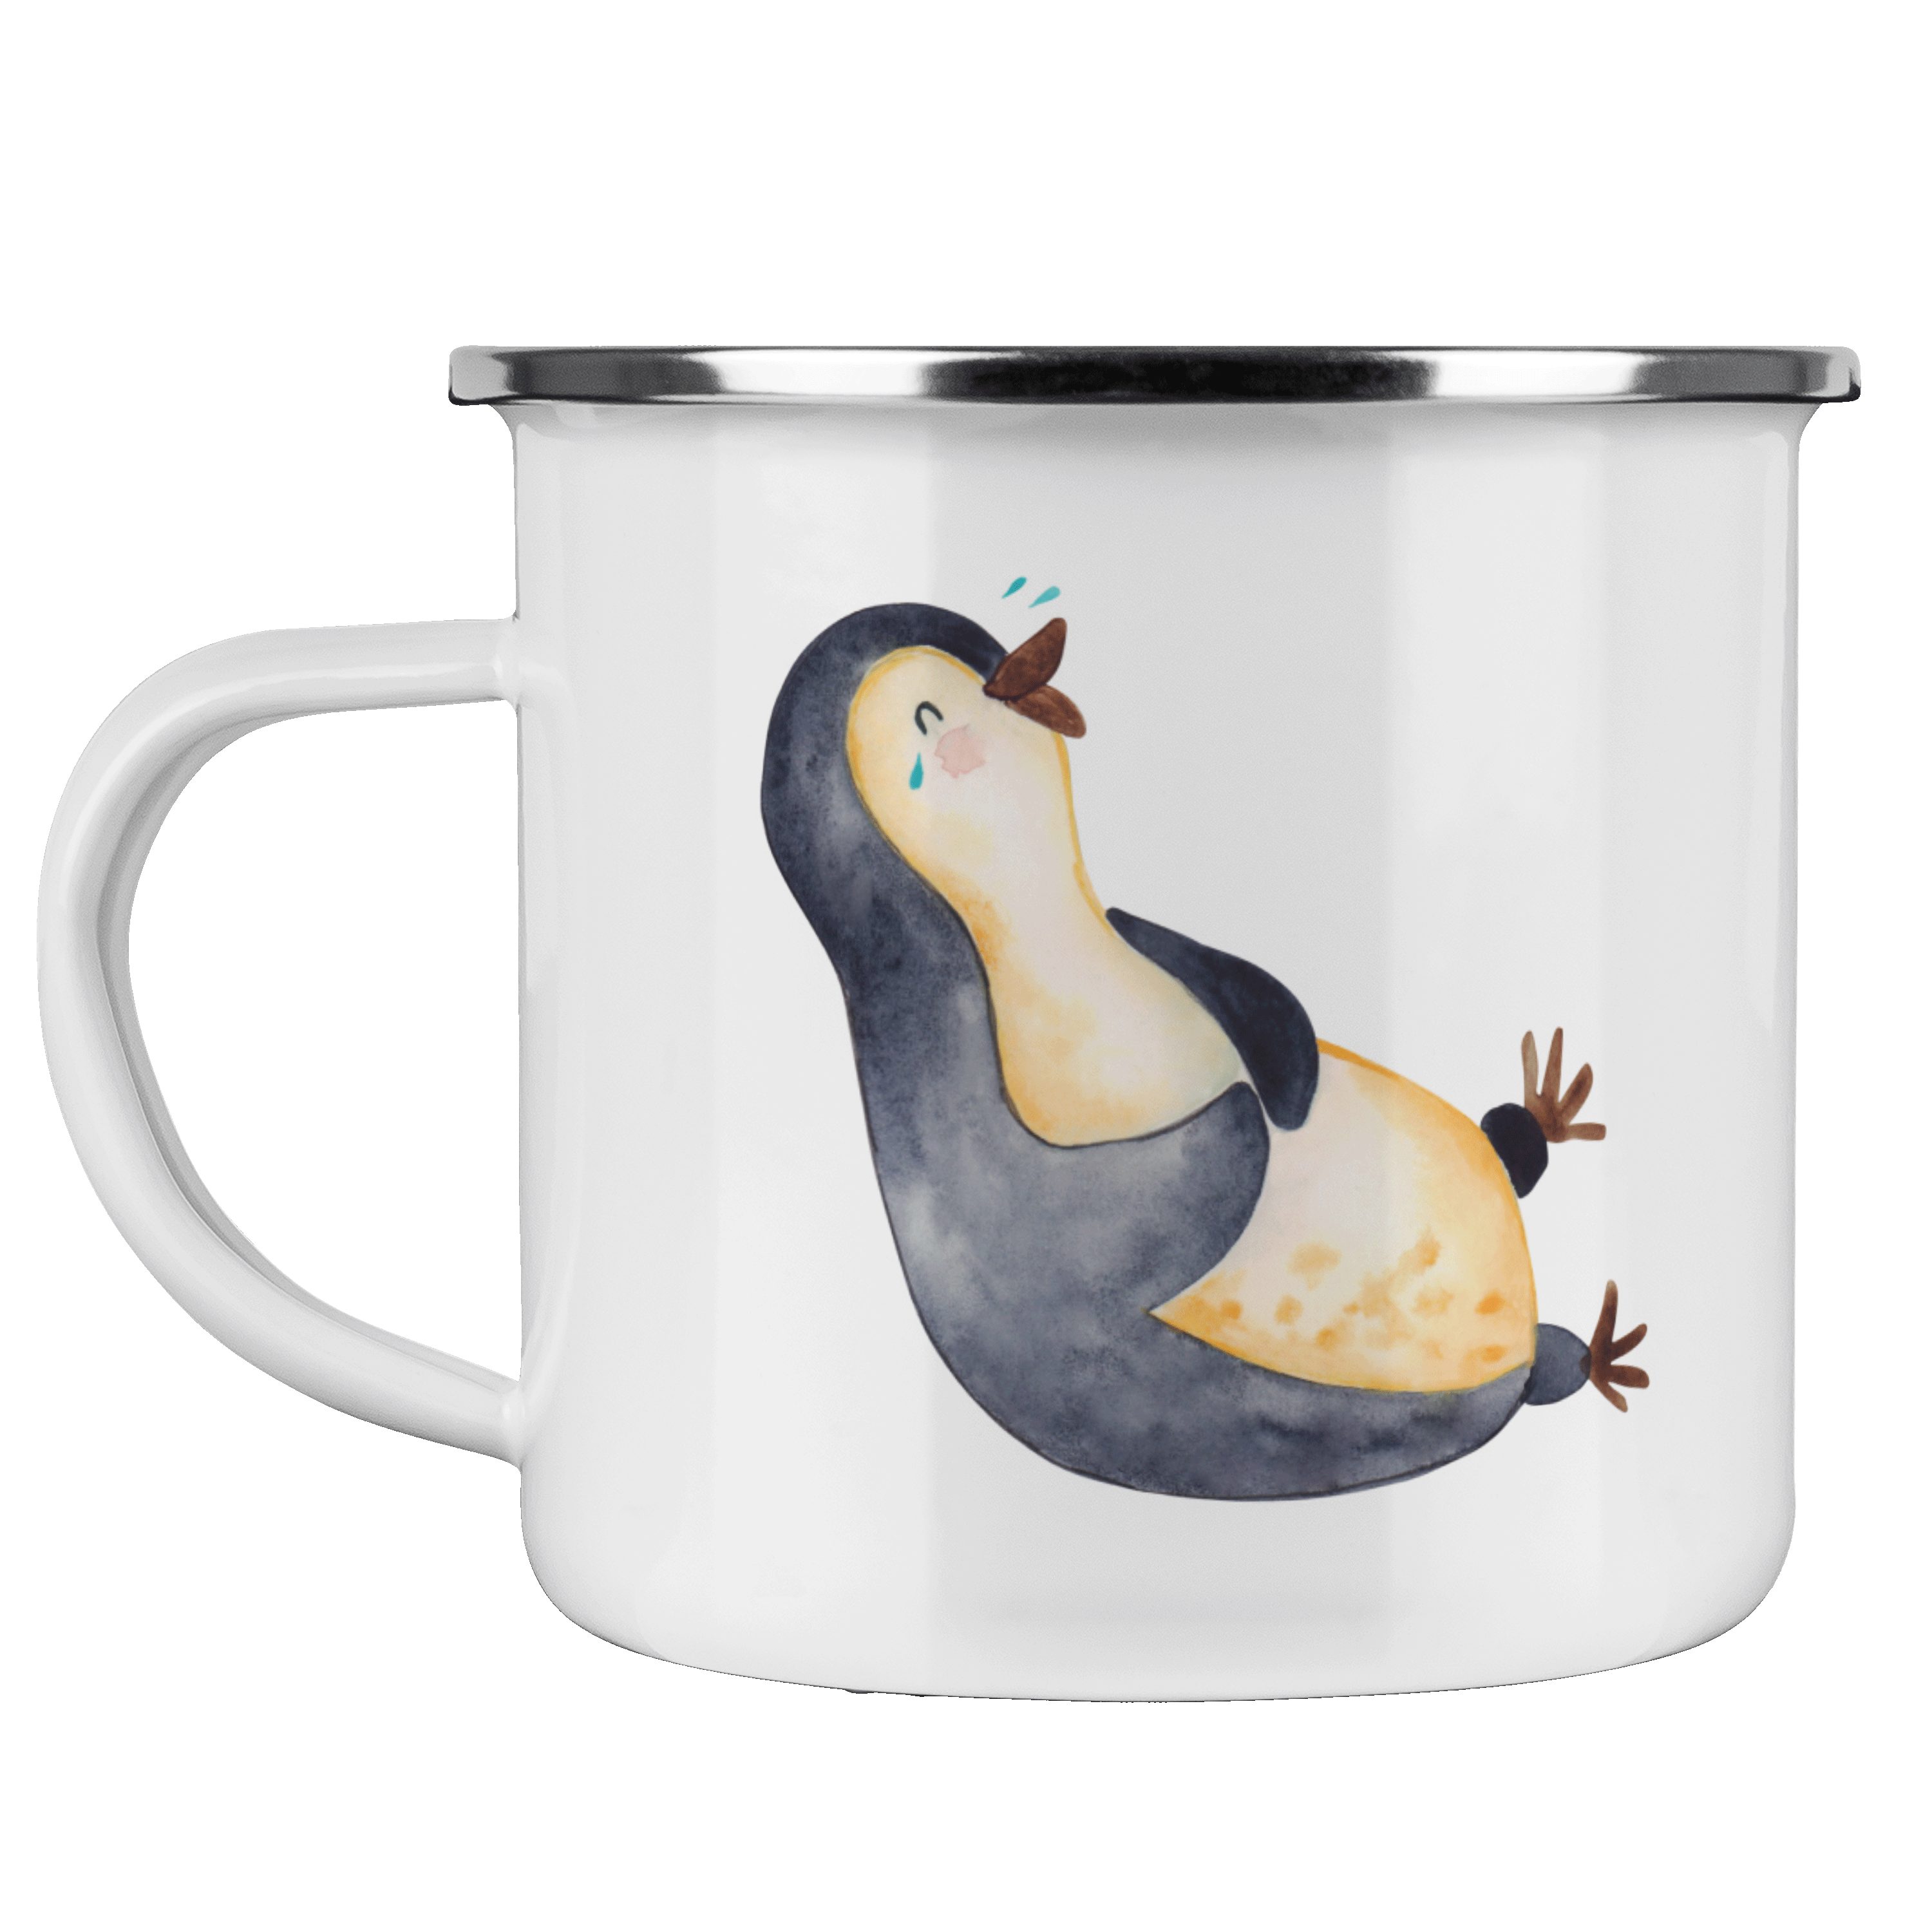 Mr. & Mrs. Panda Becher Pinguin lachend - Weiß - Geschenk, Emaille Campingbecher, funny, Opti, Emaille